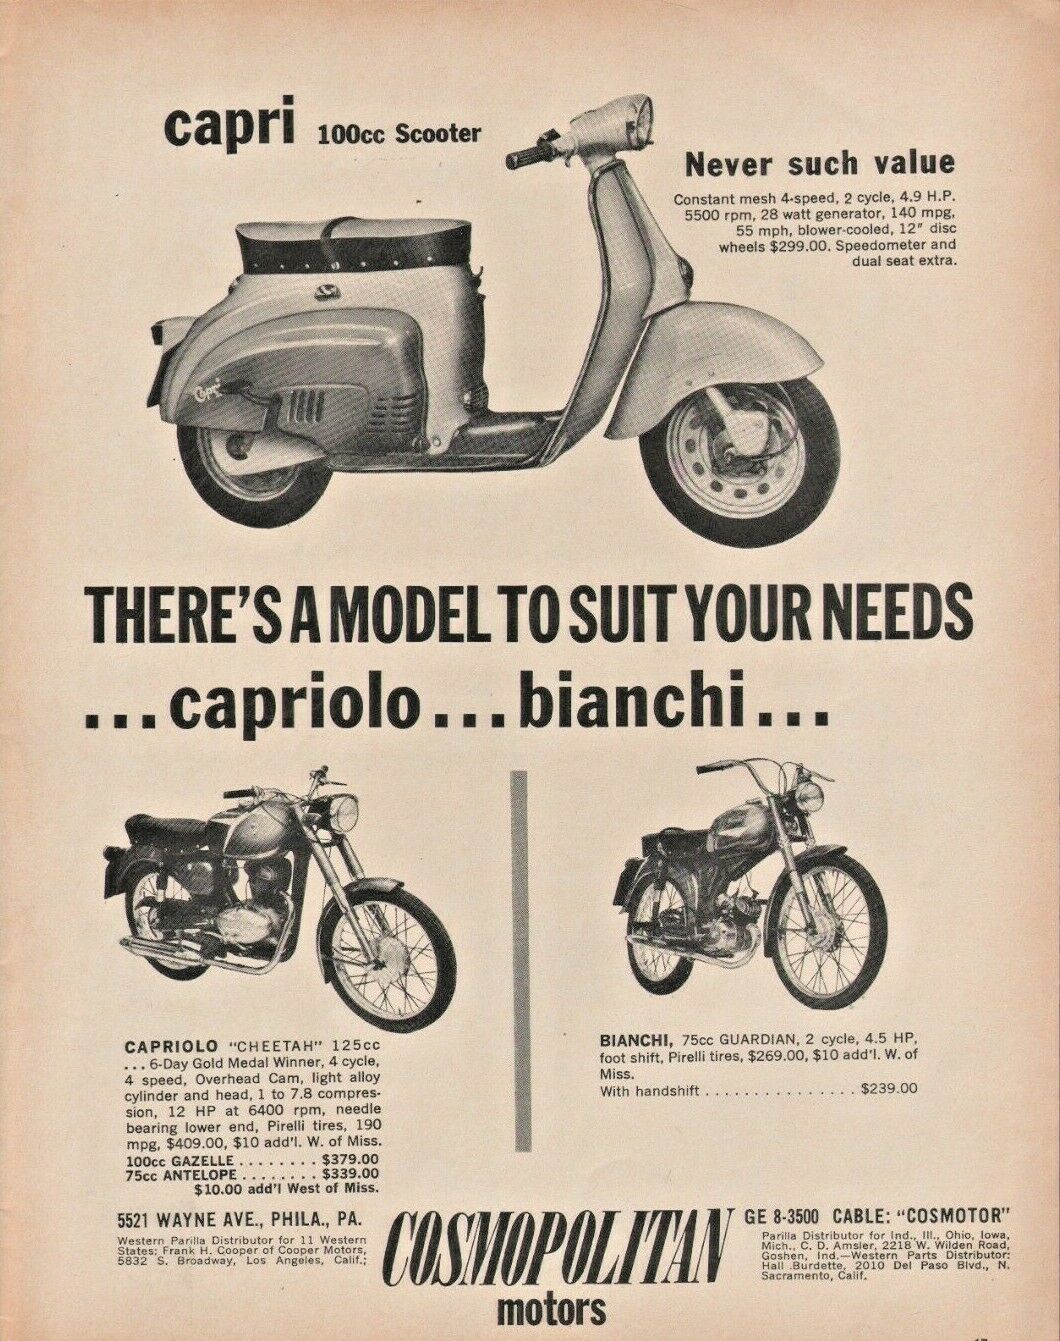 1964 Capri 100 Scooter Capriolo Cheetah Bianchi Guardian - Vintage Motorcycle Ad